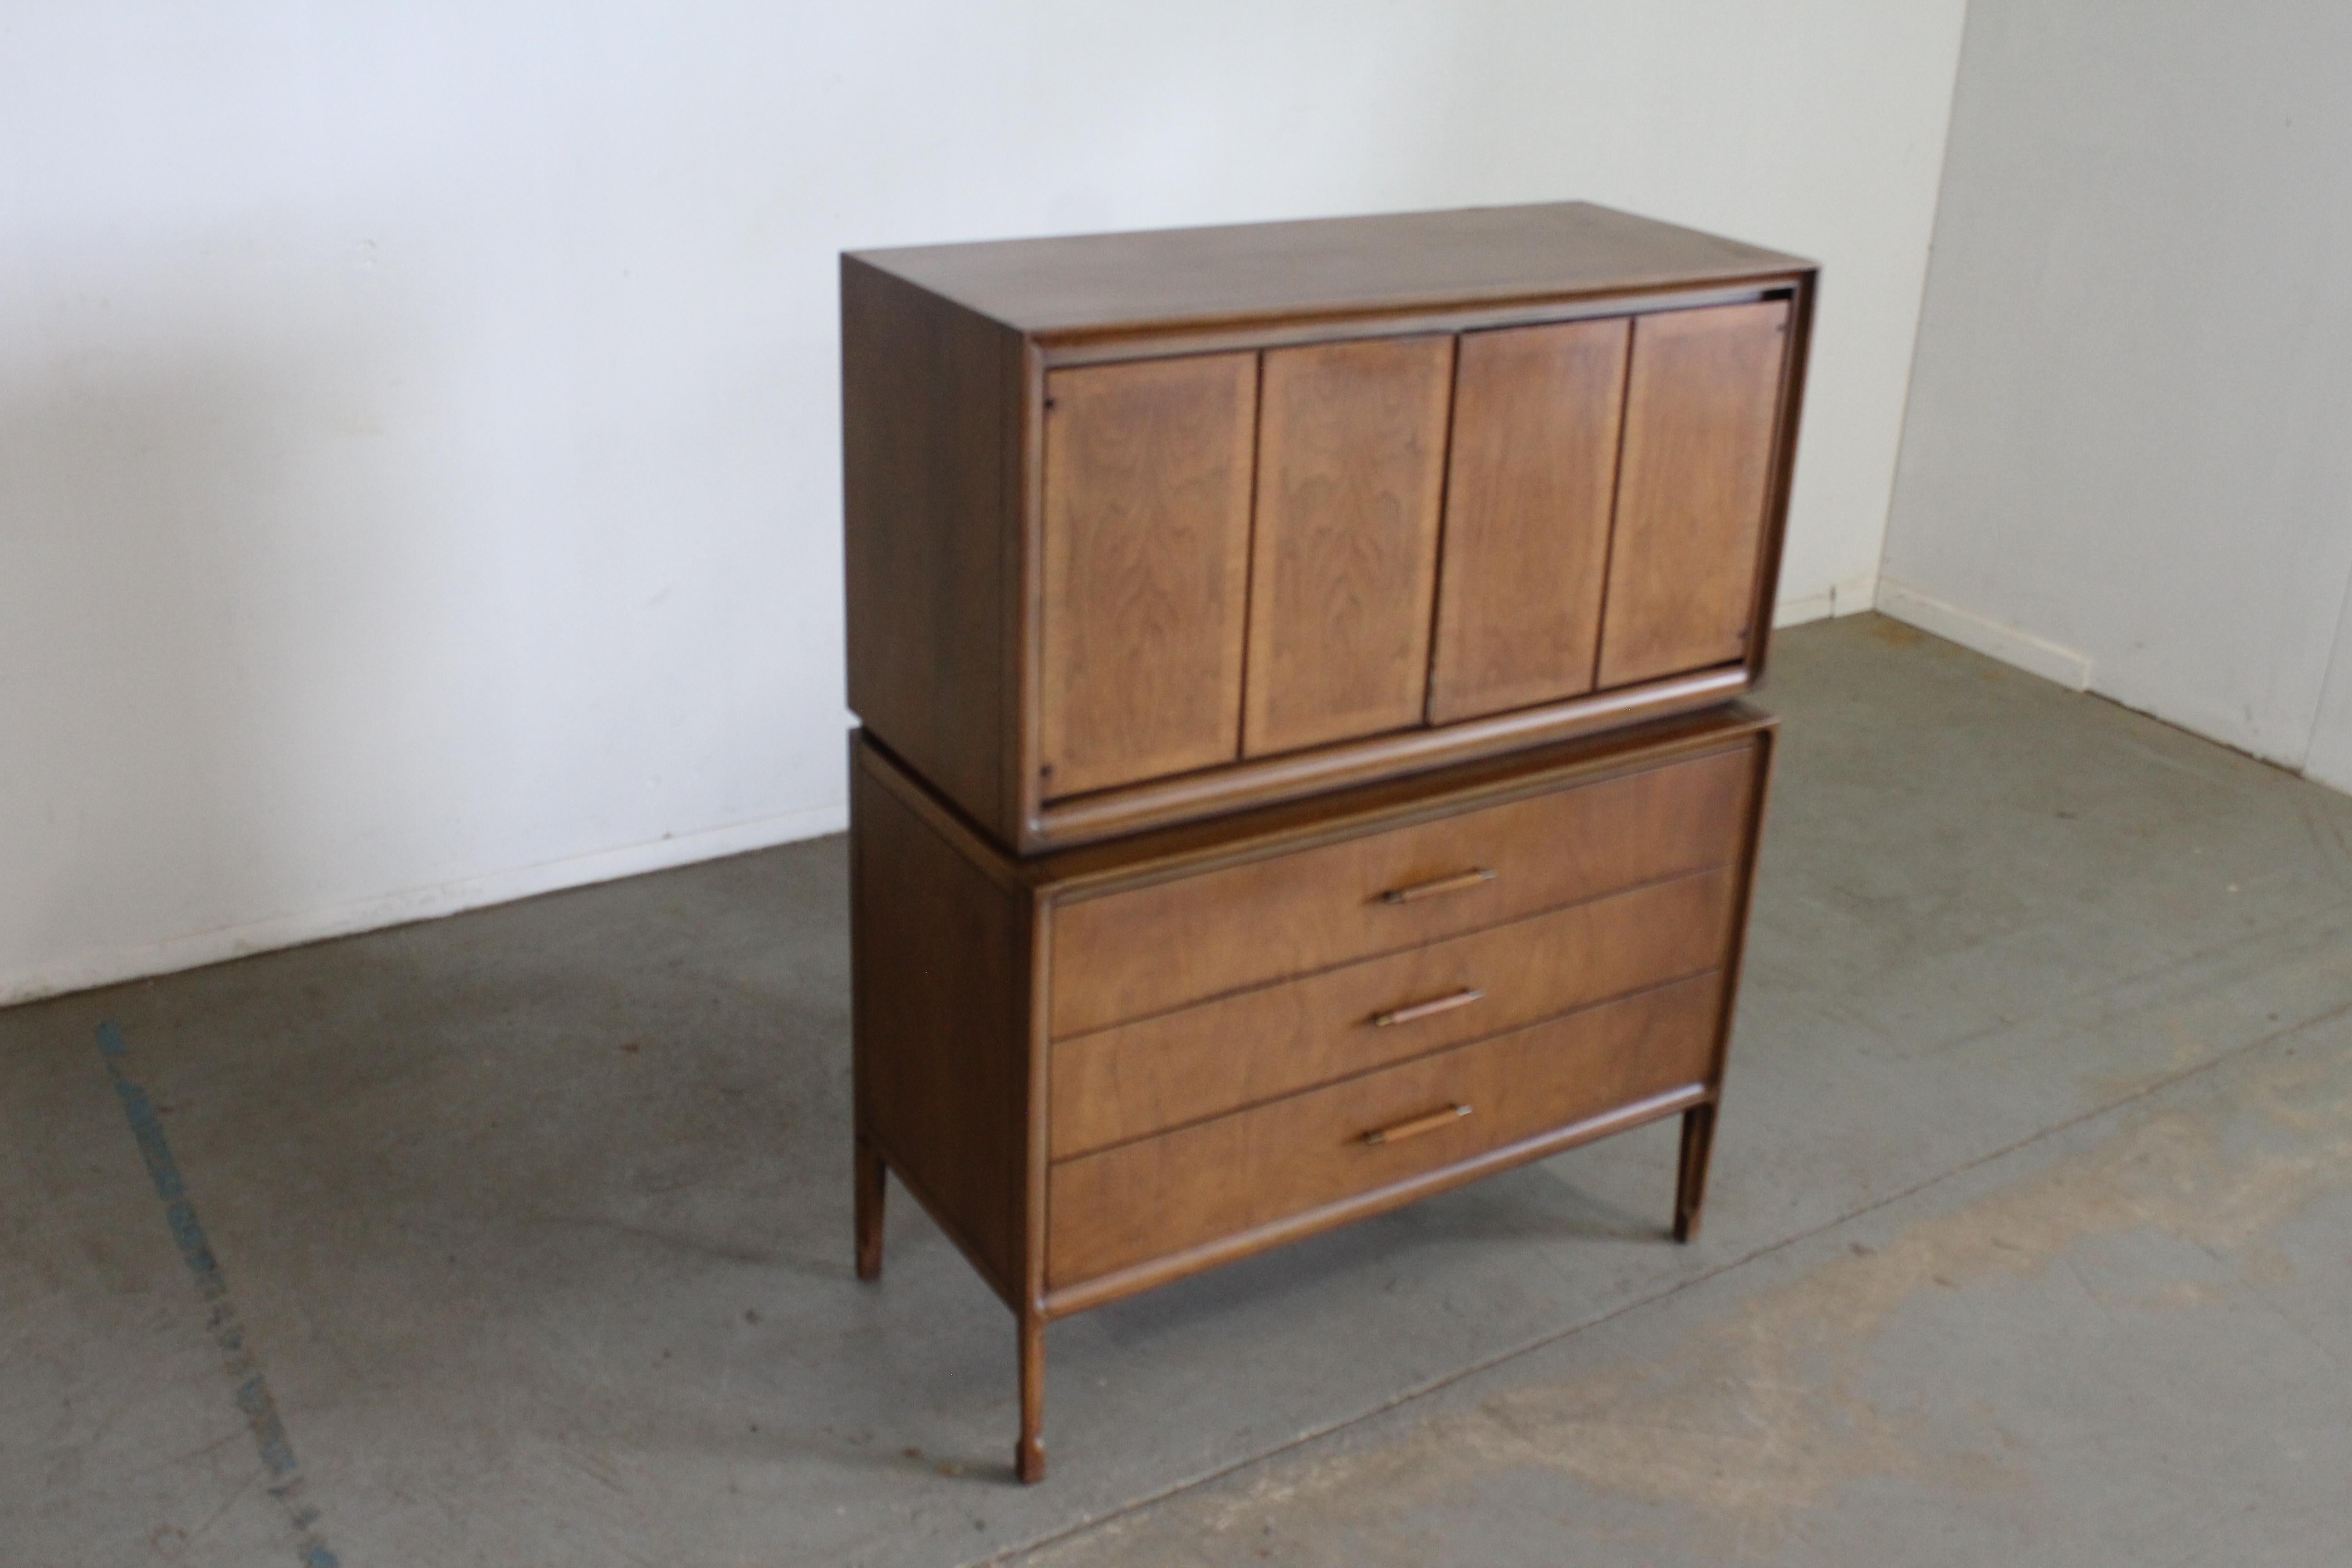 Mid-Century Modern Walnut Gentleman's tall chest

Offered is an excellent example of American mid-century modern design; a walnut dresser from the 1960's. Features dovetailed drawers with tapered legs and sculpted pulls. It is in good original